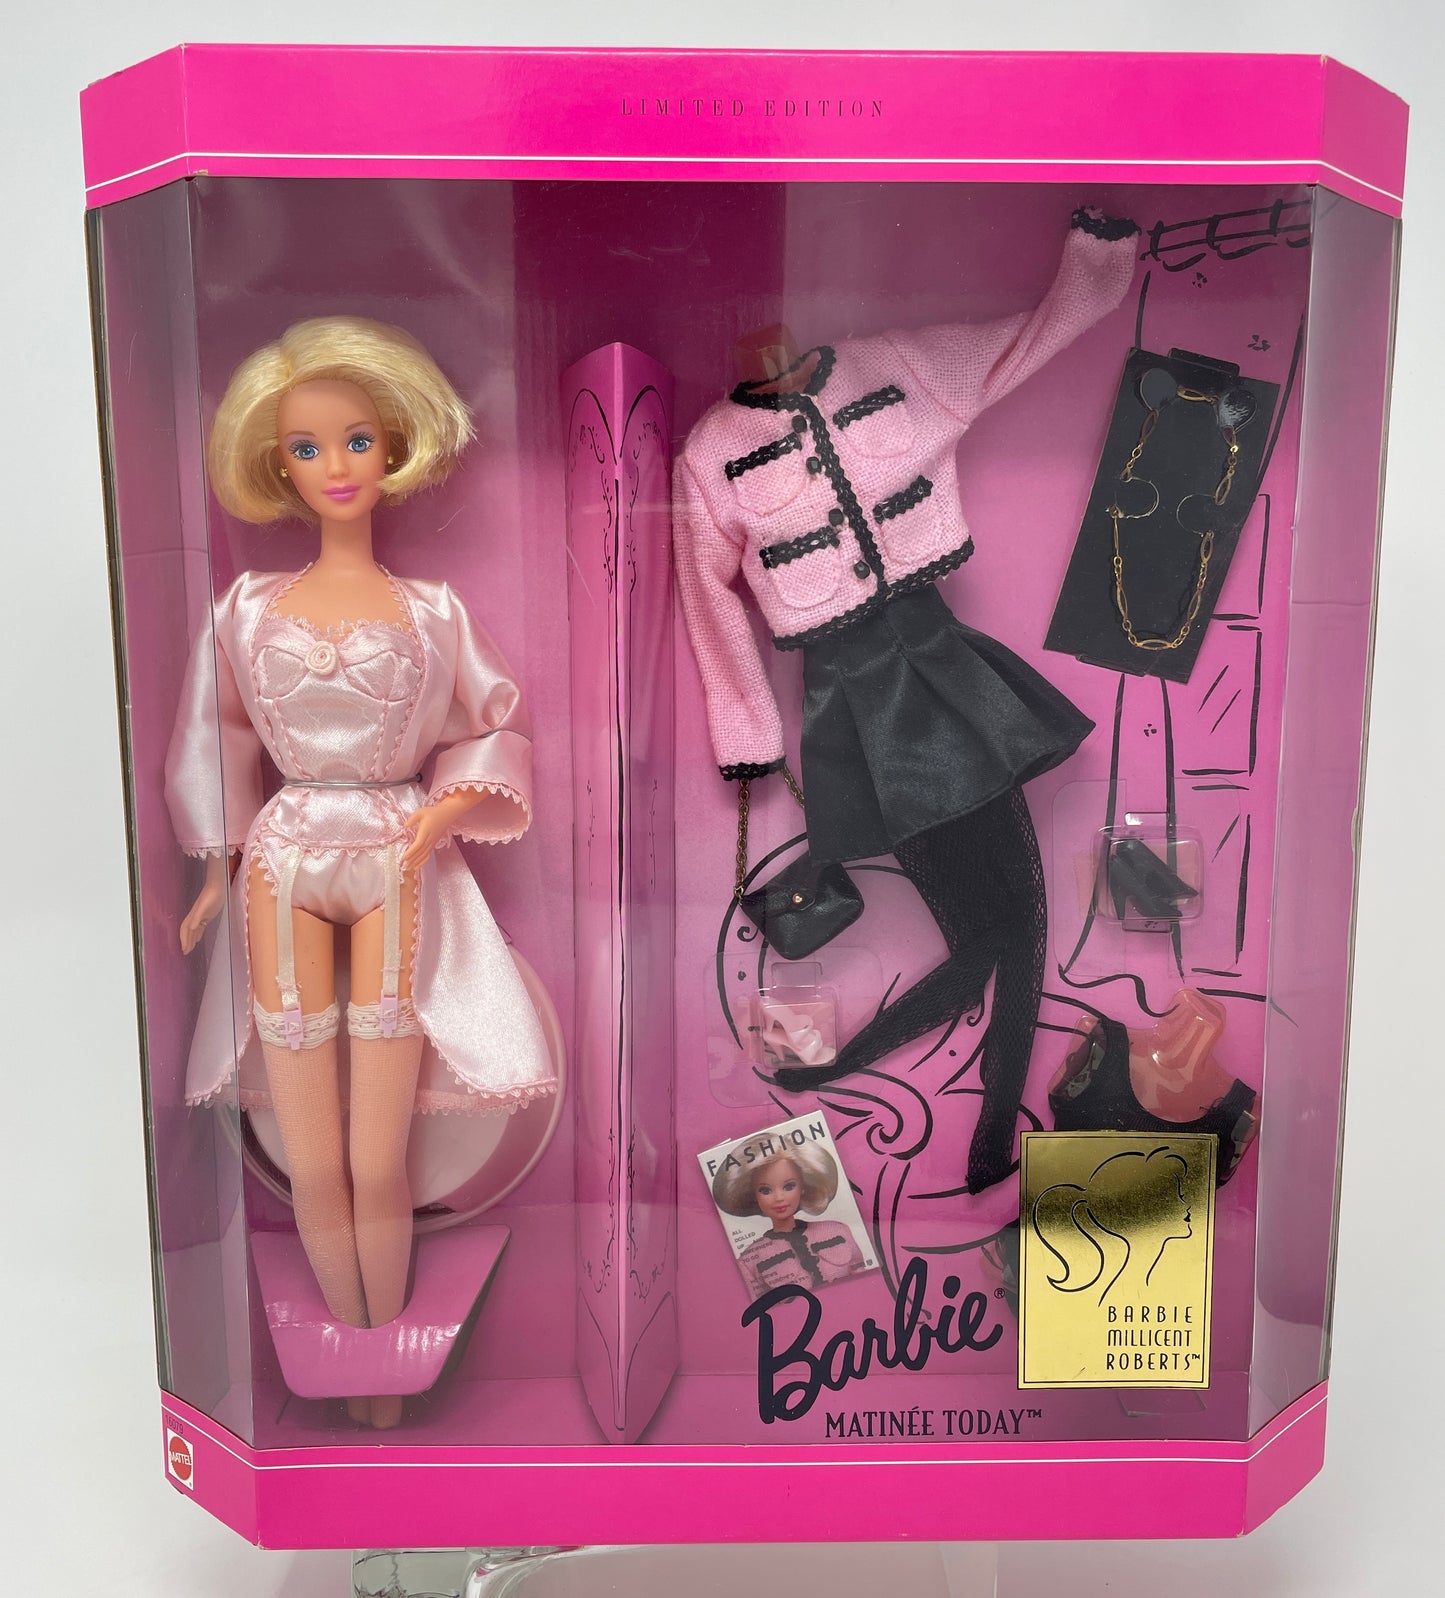 BARBIE MATINEE TODAY - BARBIE MILLICENT ROBERTS COLLECTION - LIMITED EDITION - #16079 - MATTEL 1996